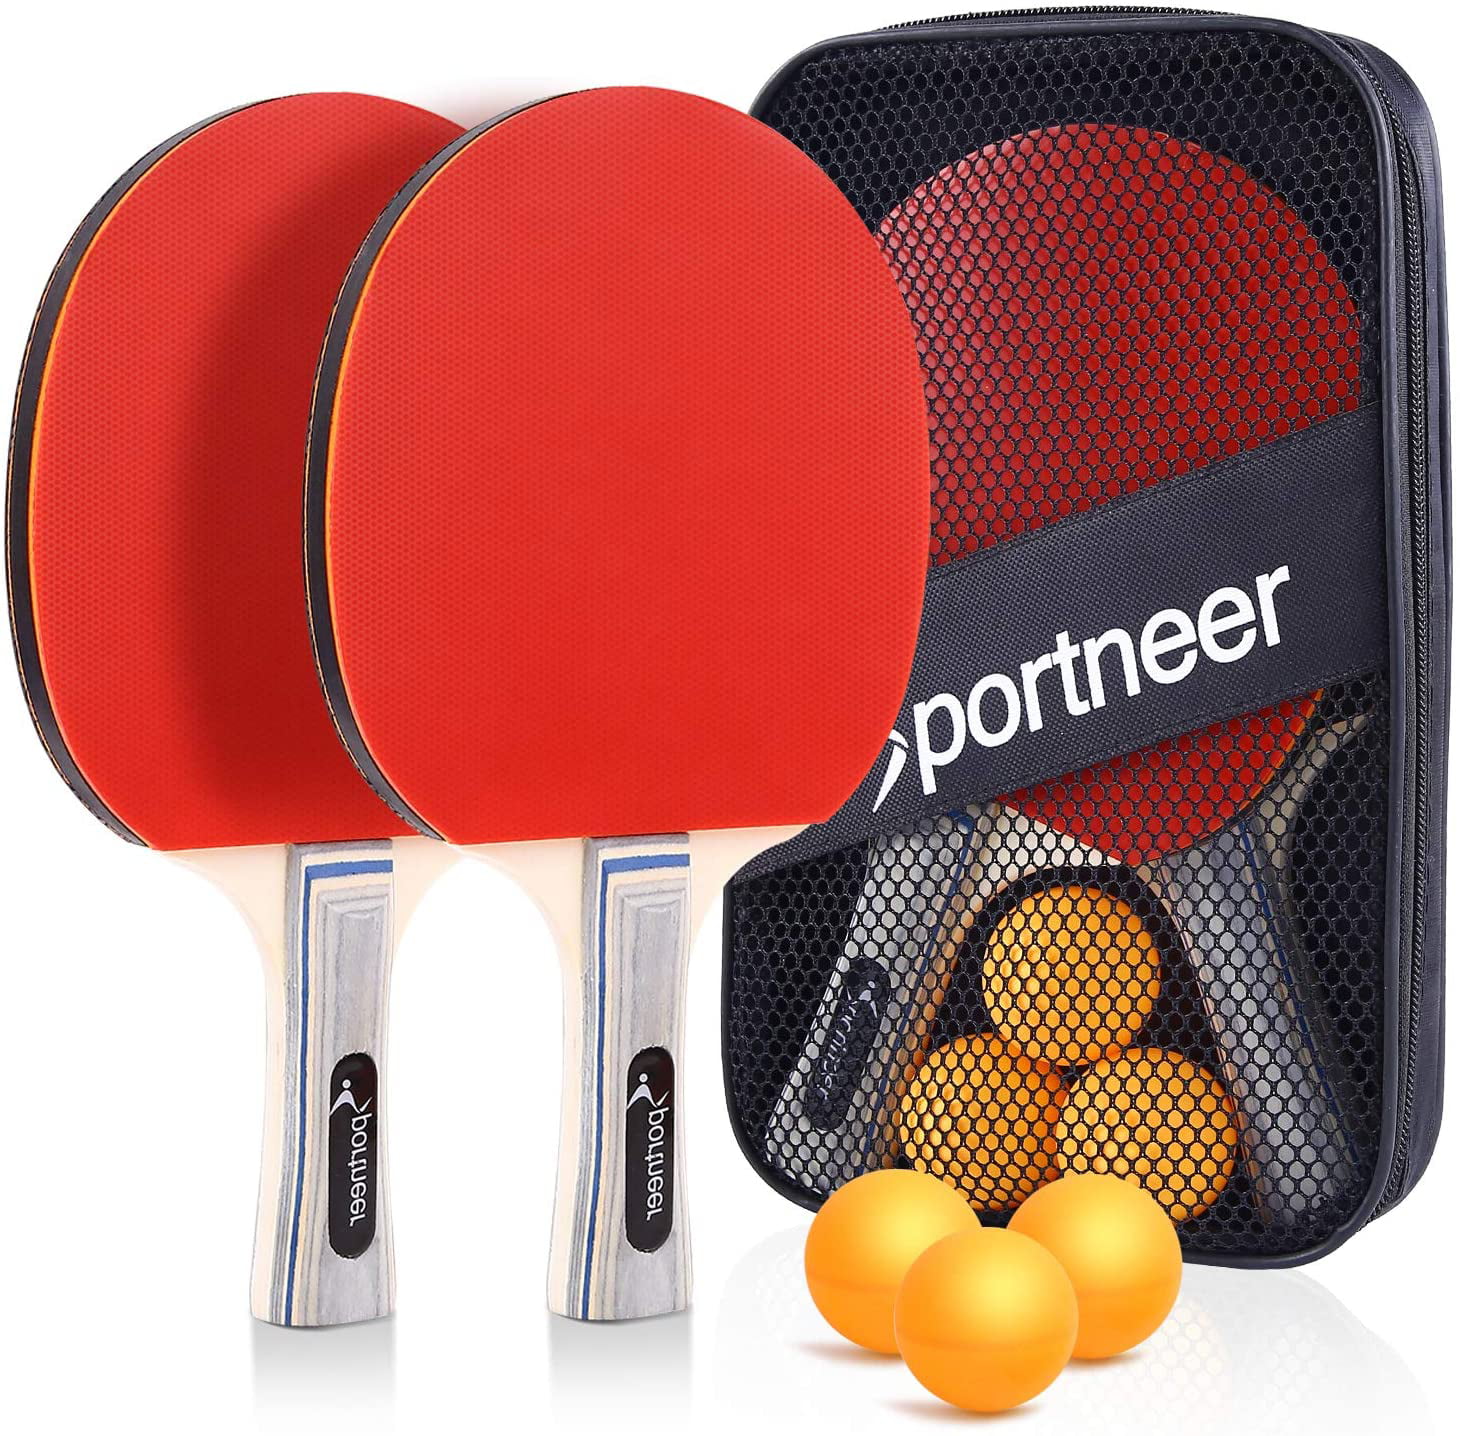 All-in-1 Portable Ping Pong Paddle Set with Retractable Net Table for Anywhere 2 Table Tennis Paddles/Rackets 3-Star Balls Portable Storage Carrying Case Control Spin Indoor Outdoor Play